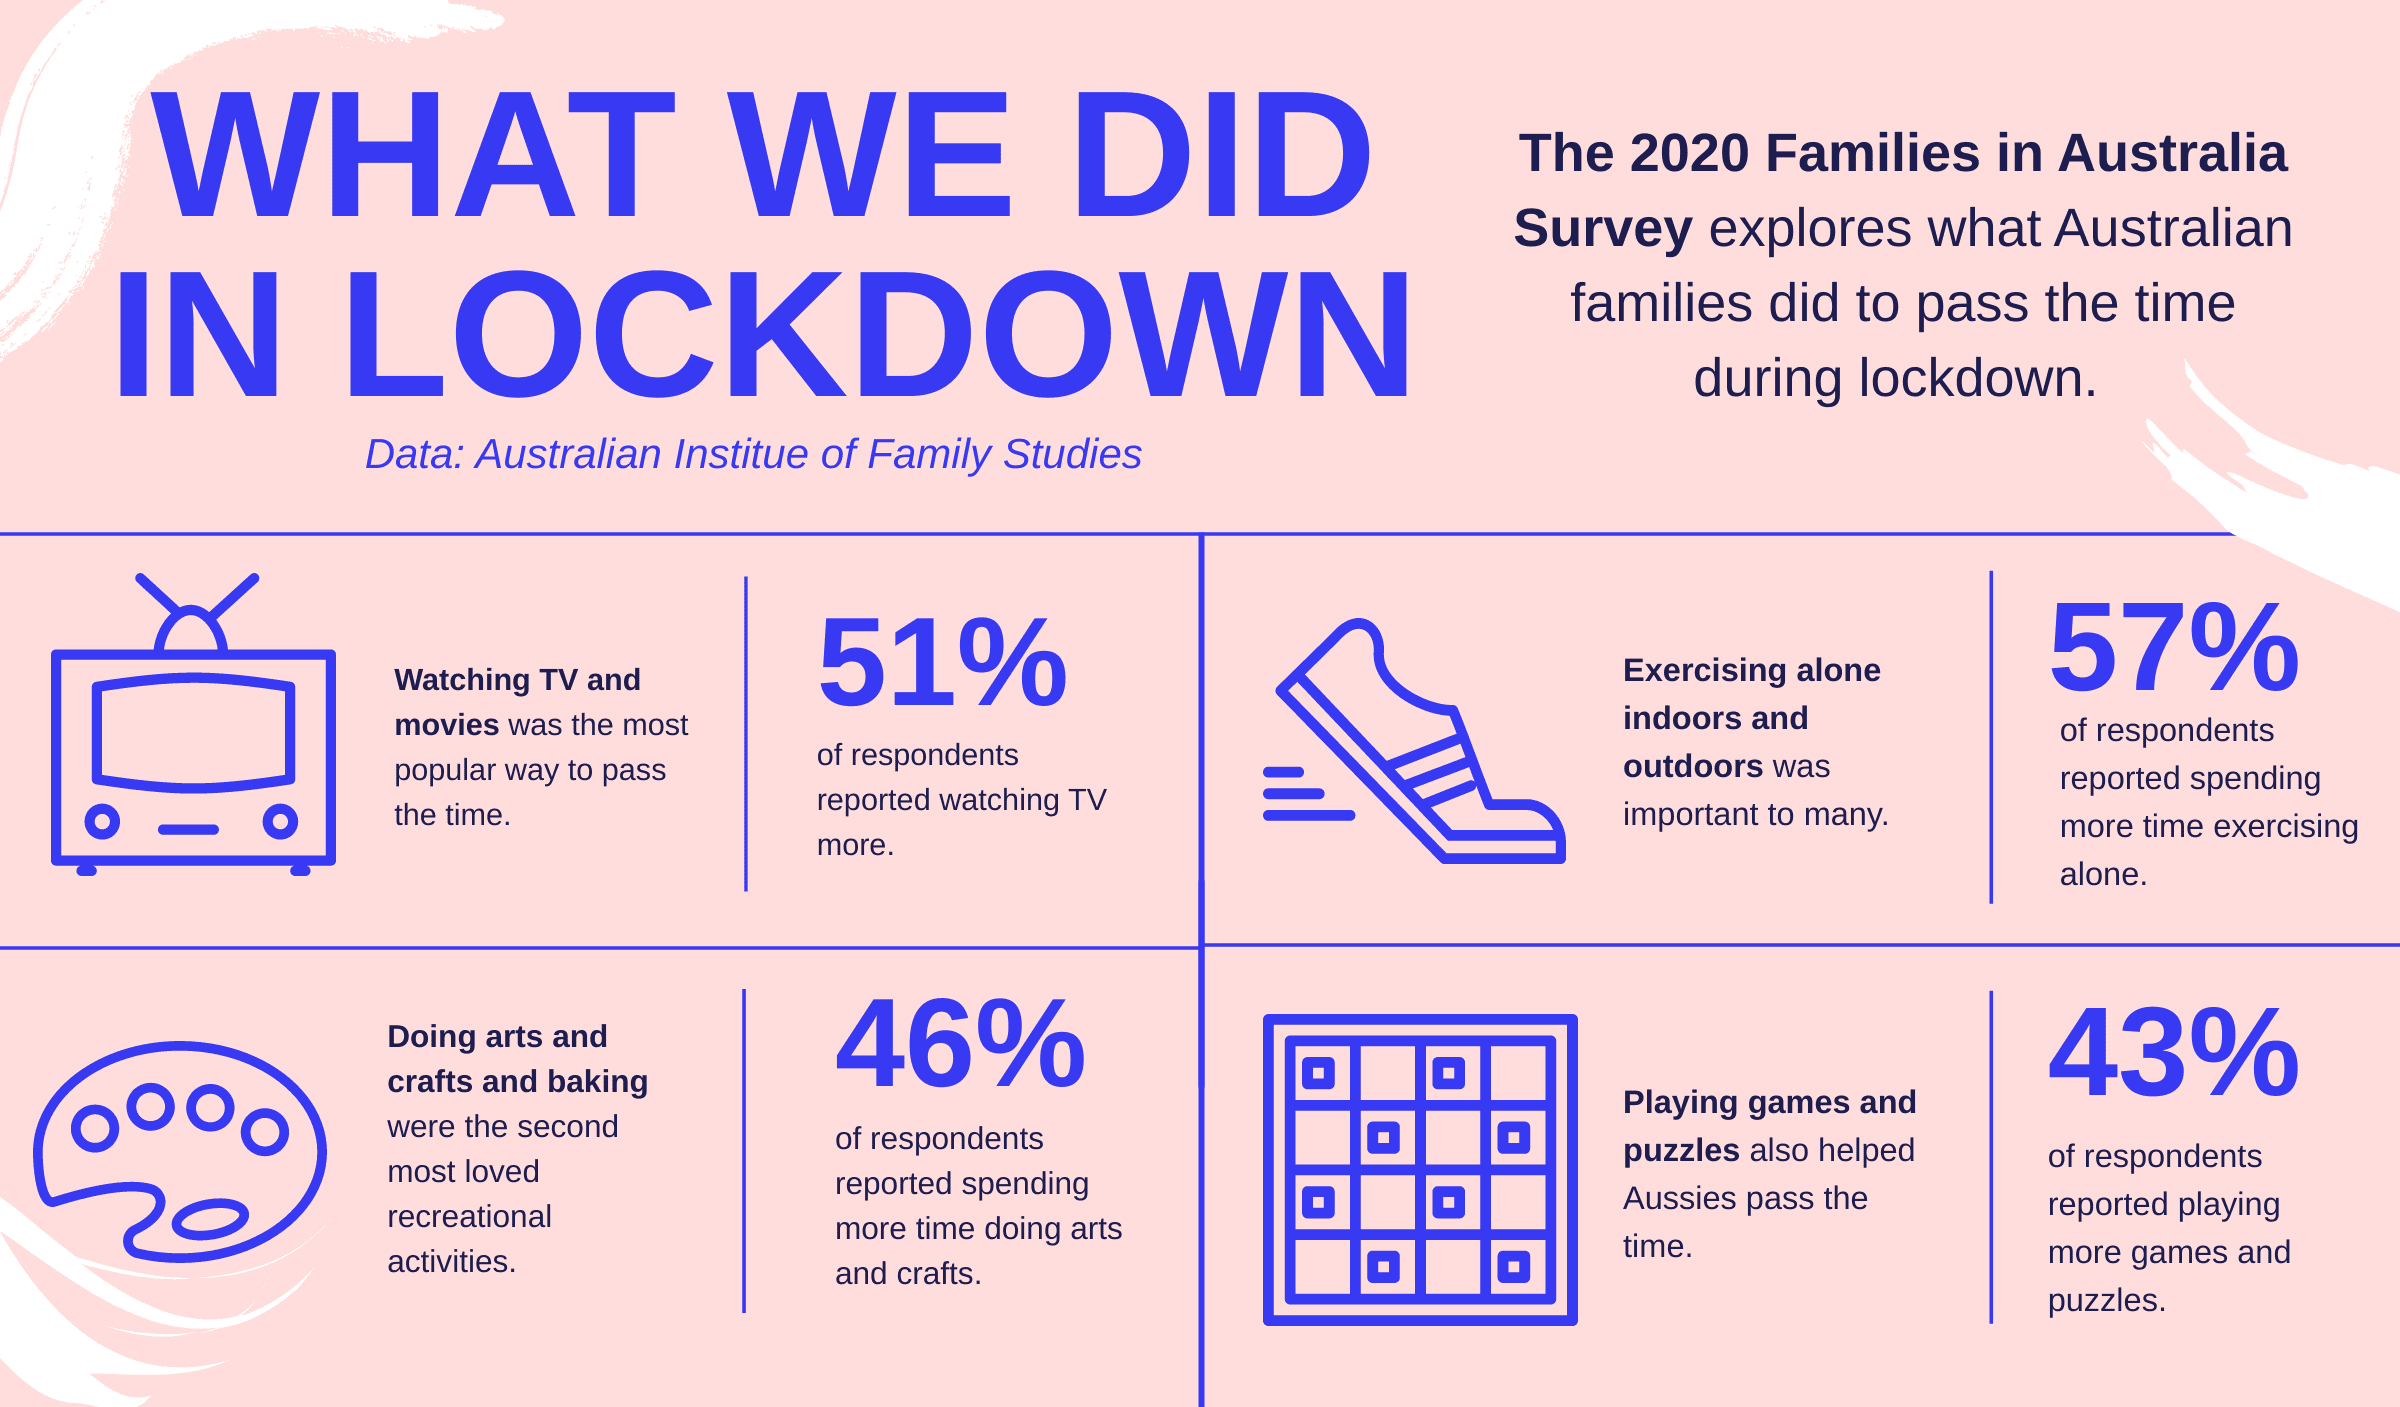 An infographic showing what Australians did during lockdown. Data source: the Australian Institute of Family Studies.